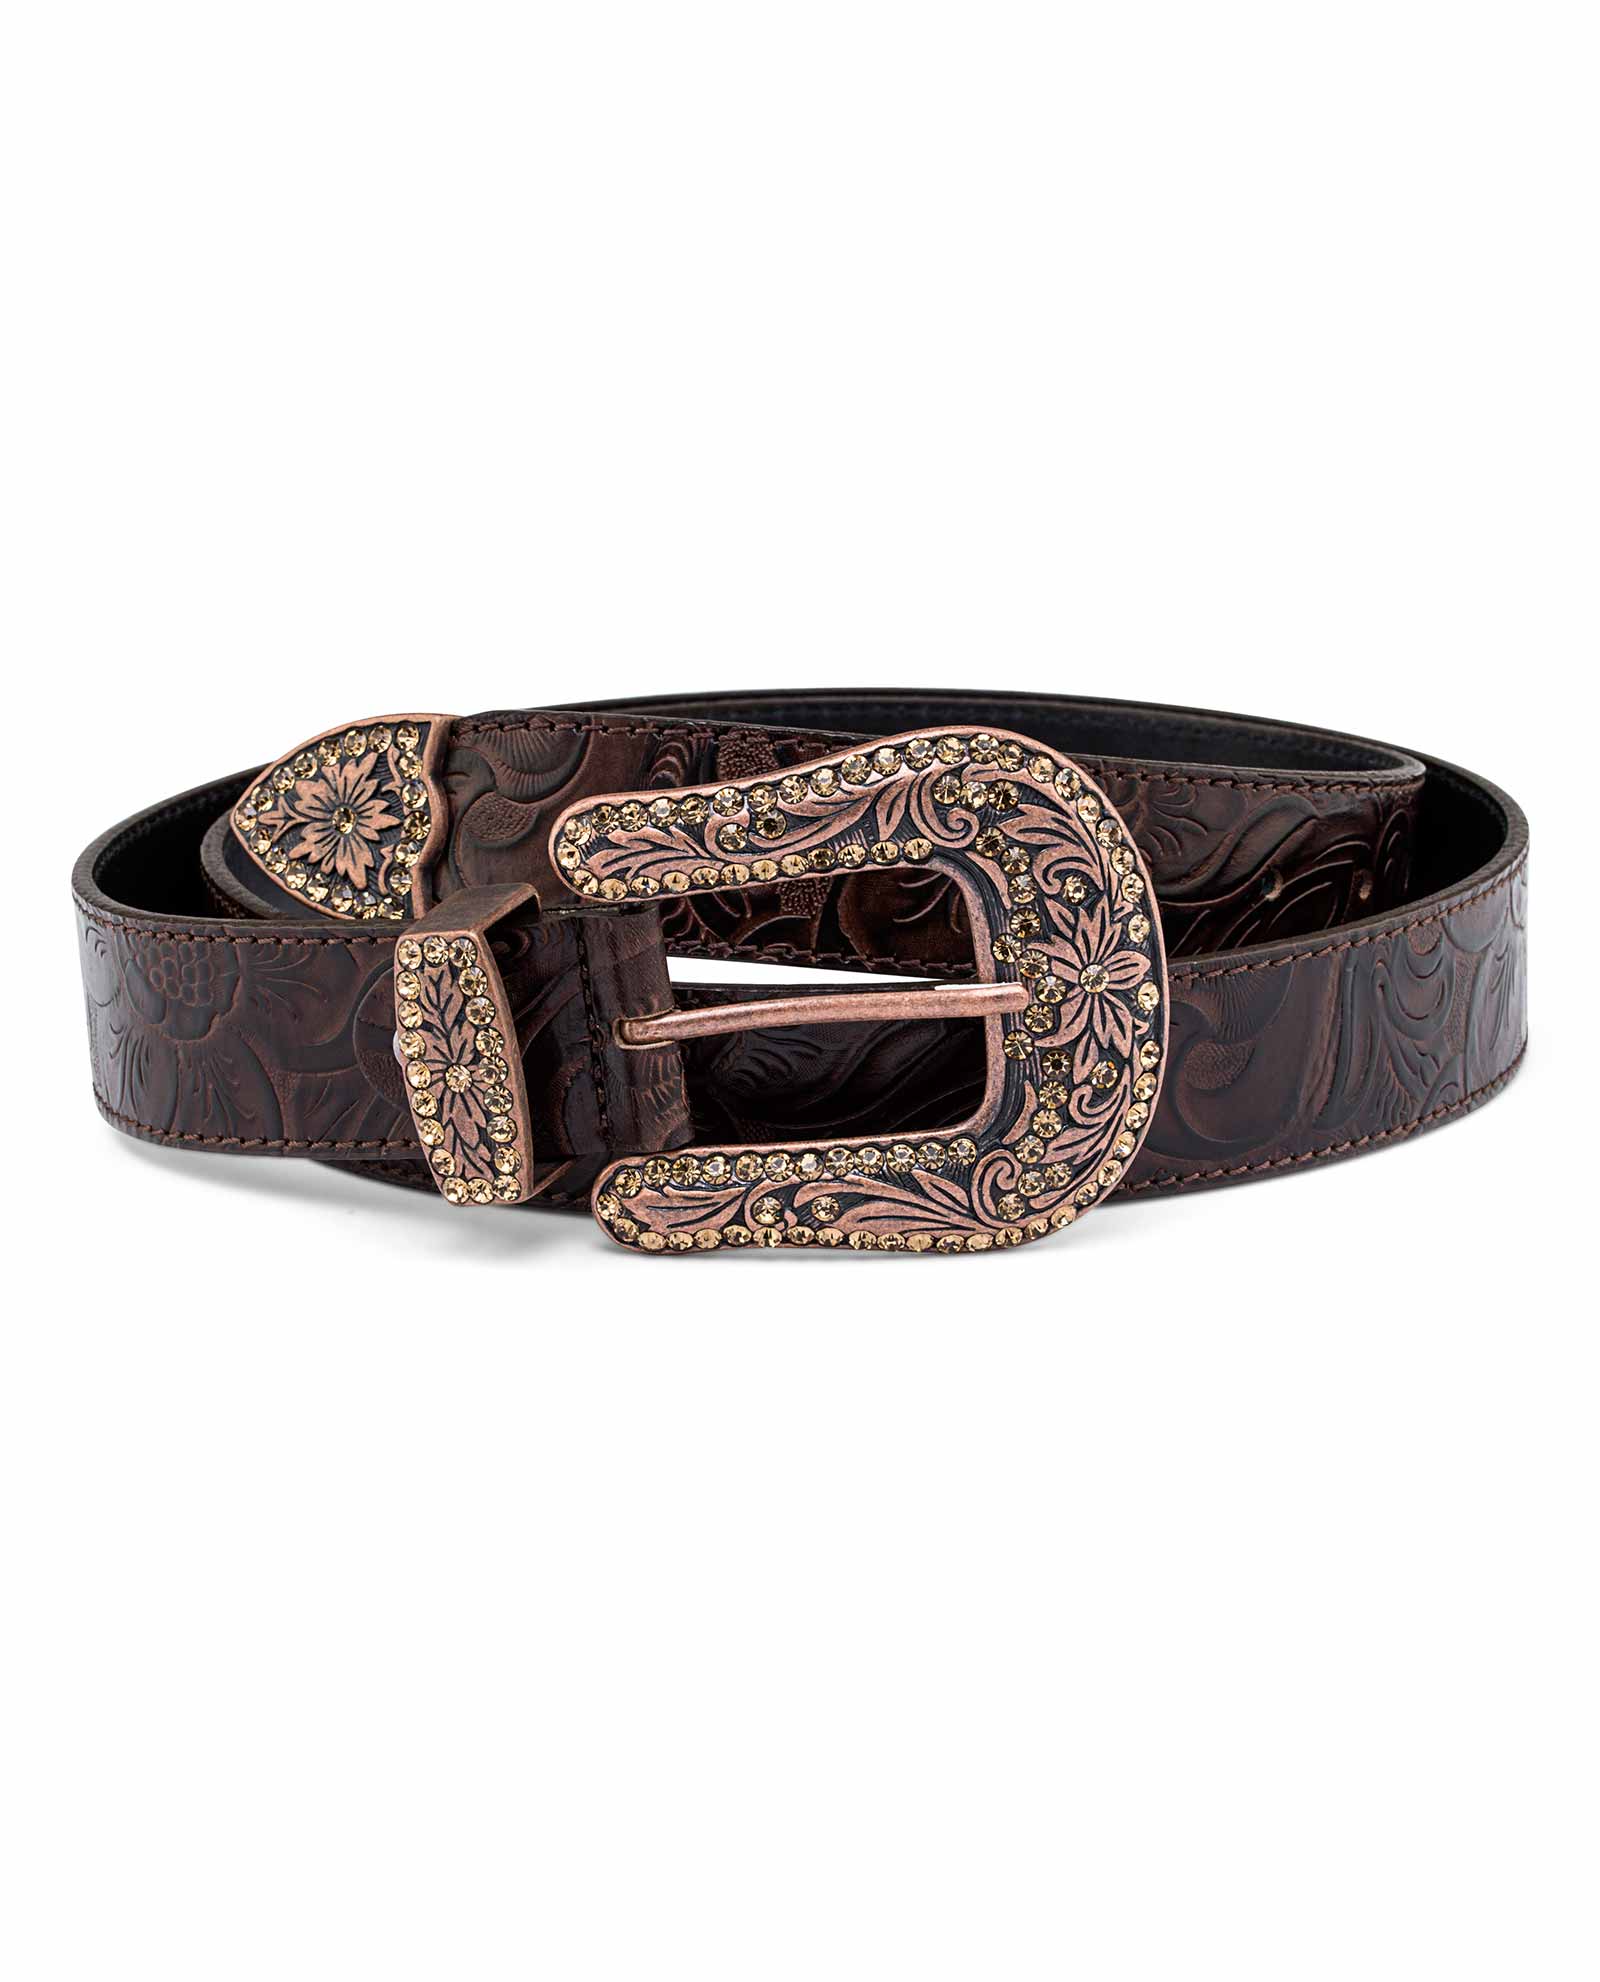 Buy Western Floral Belt With Copper Buckle | Capo Pelle | Free Shipping